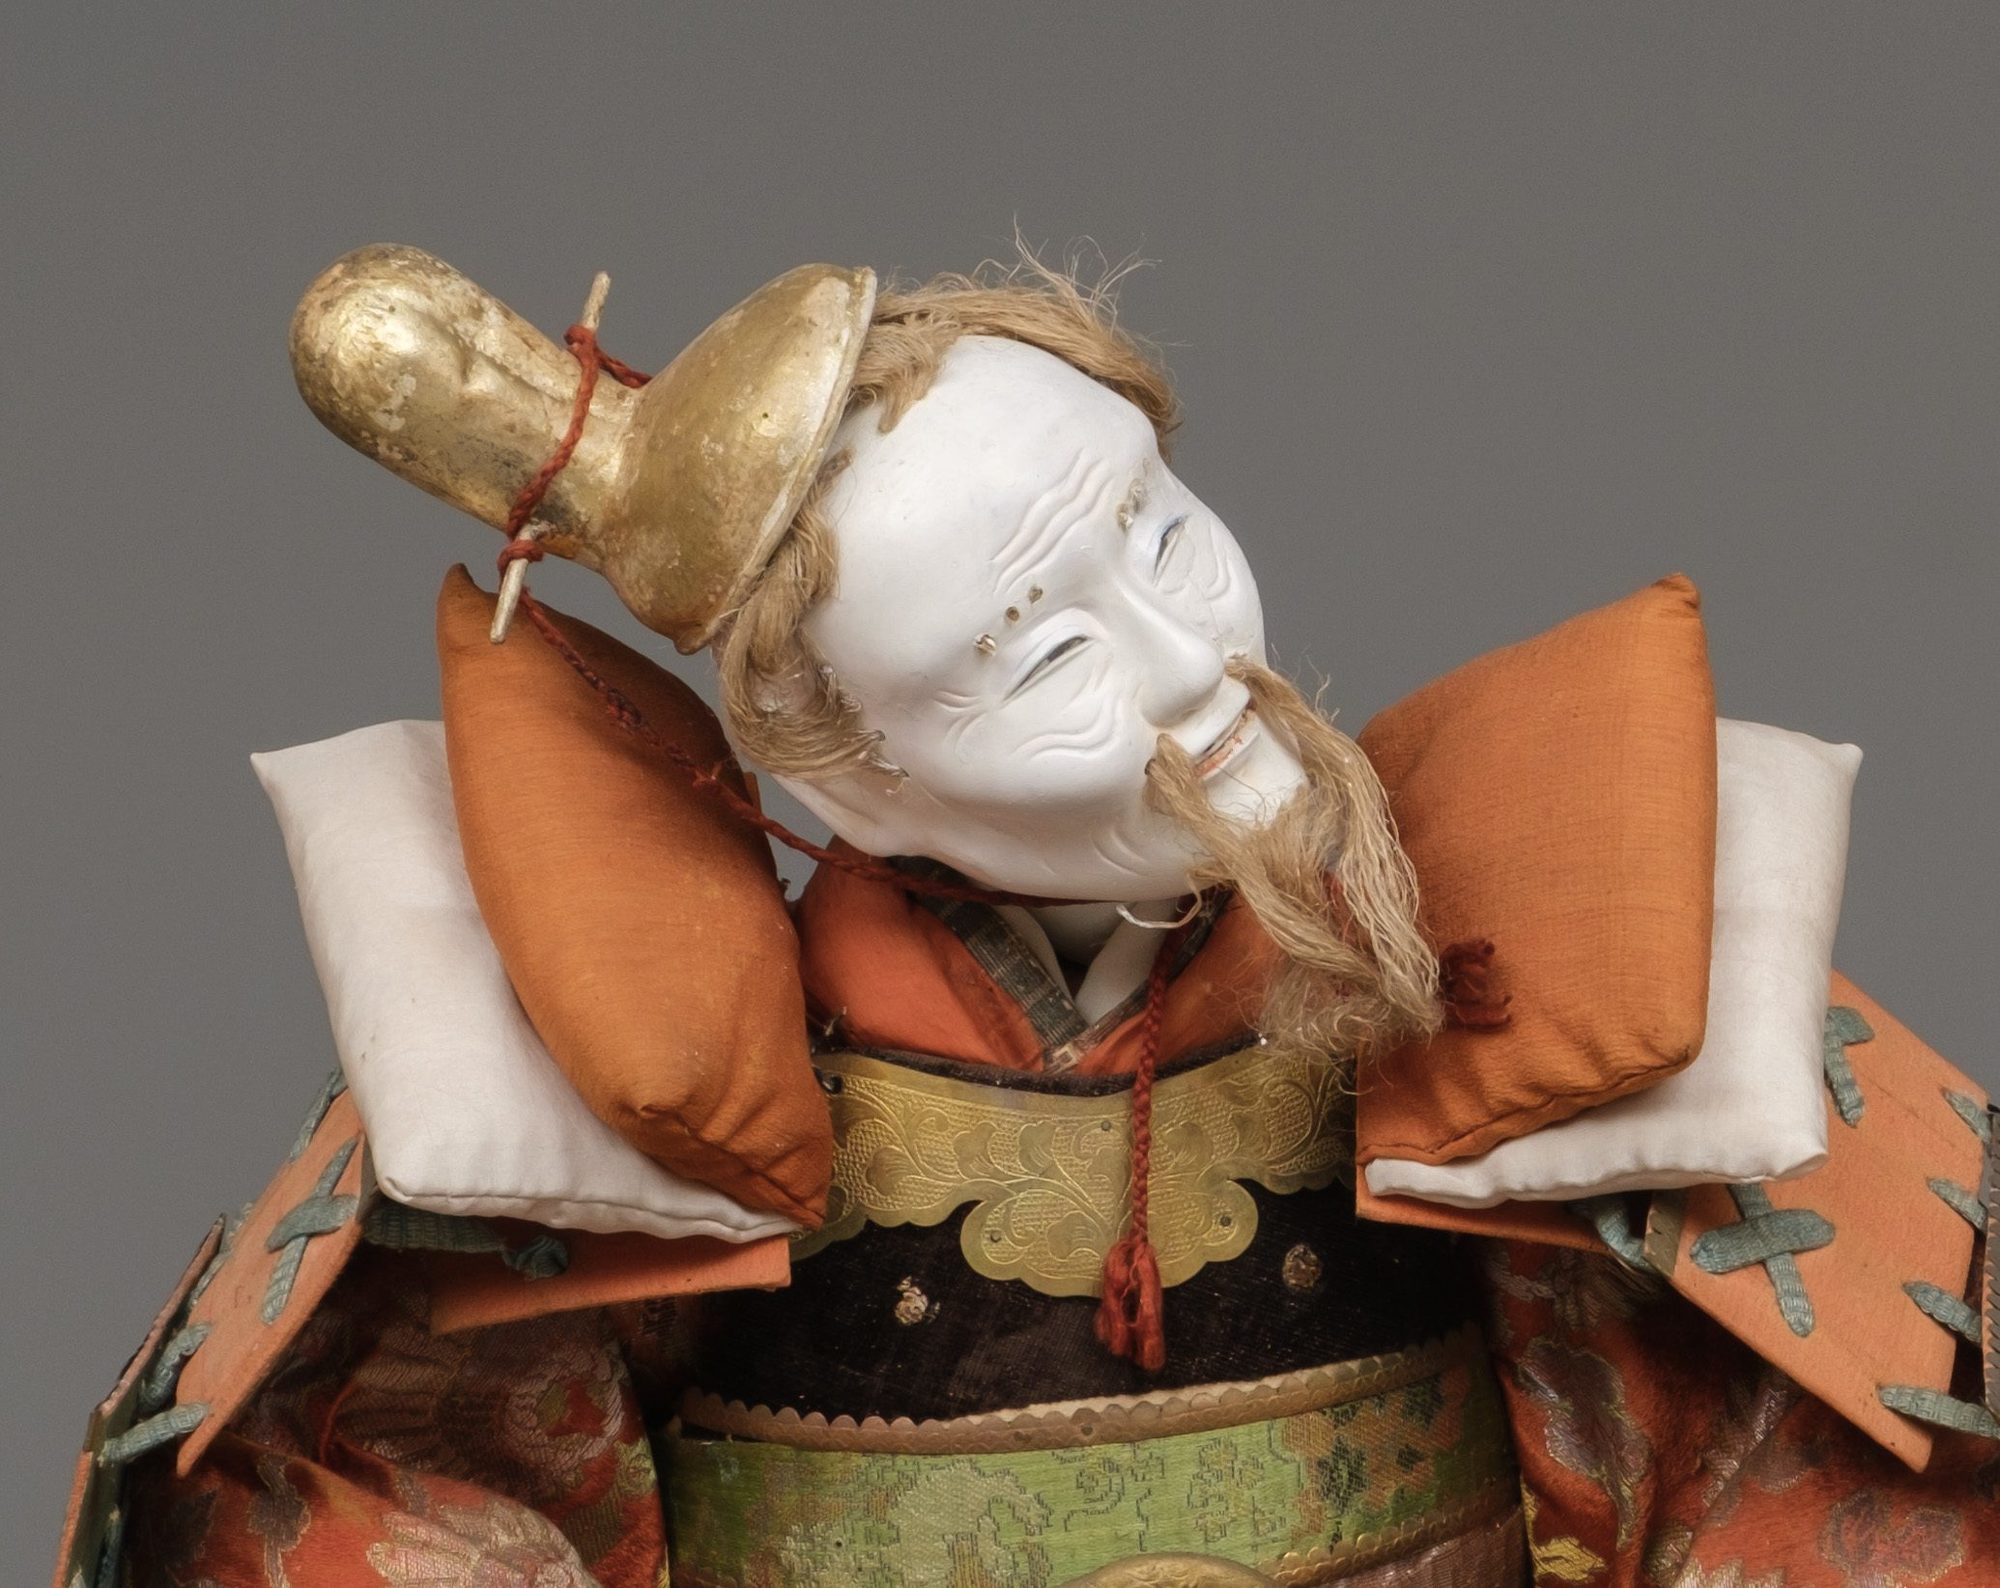 A LARGE JAPANESE HAND-CRAFTED WARRIOR DOLL, 18TH CENTURY - Image 6 of 6